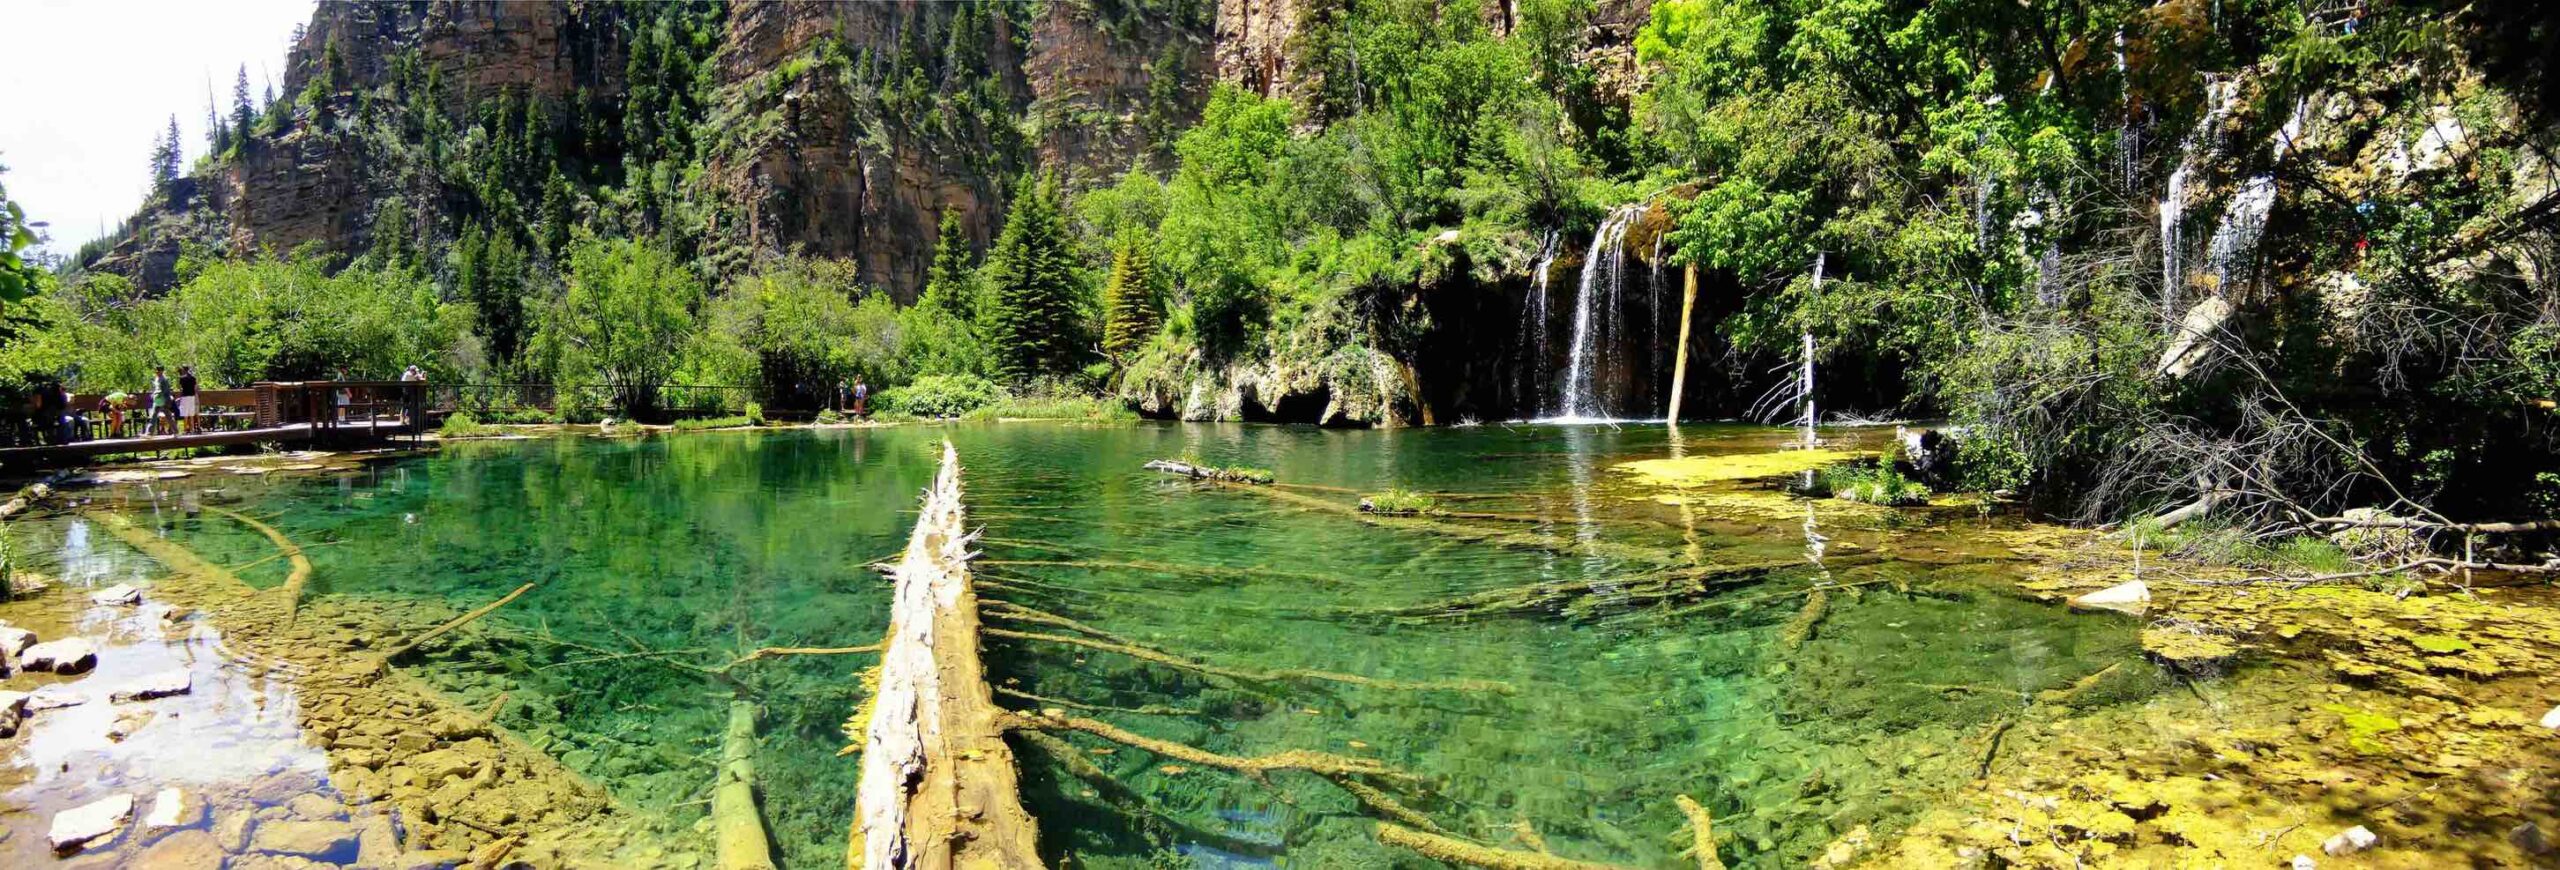 This is a photo of Hanging Lake in Glenwood Canyon. The colors around the lake are extremely vibrant with bright shades of green.